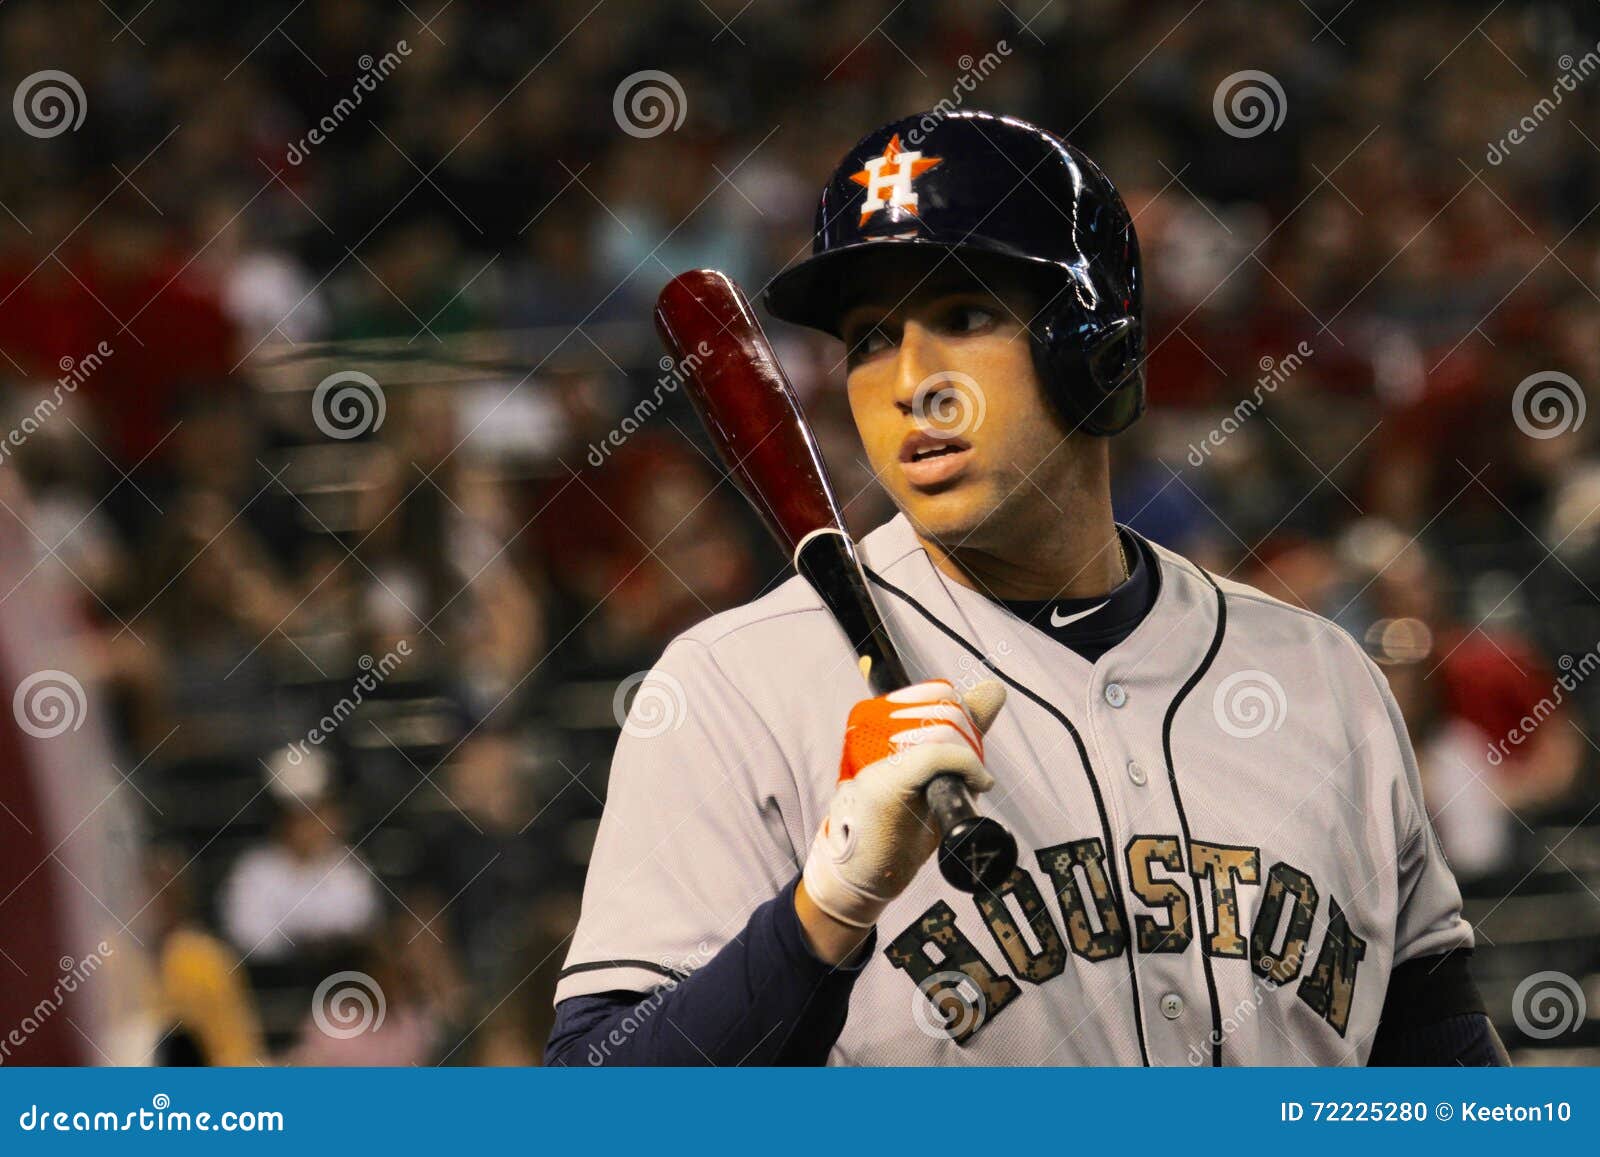 4,000 George springer Stock Pictures, Editorial Images and Stock